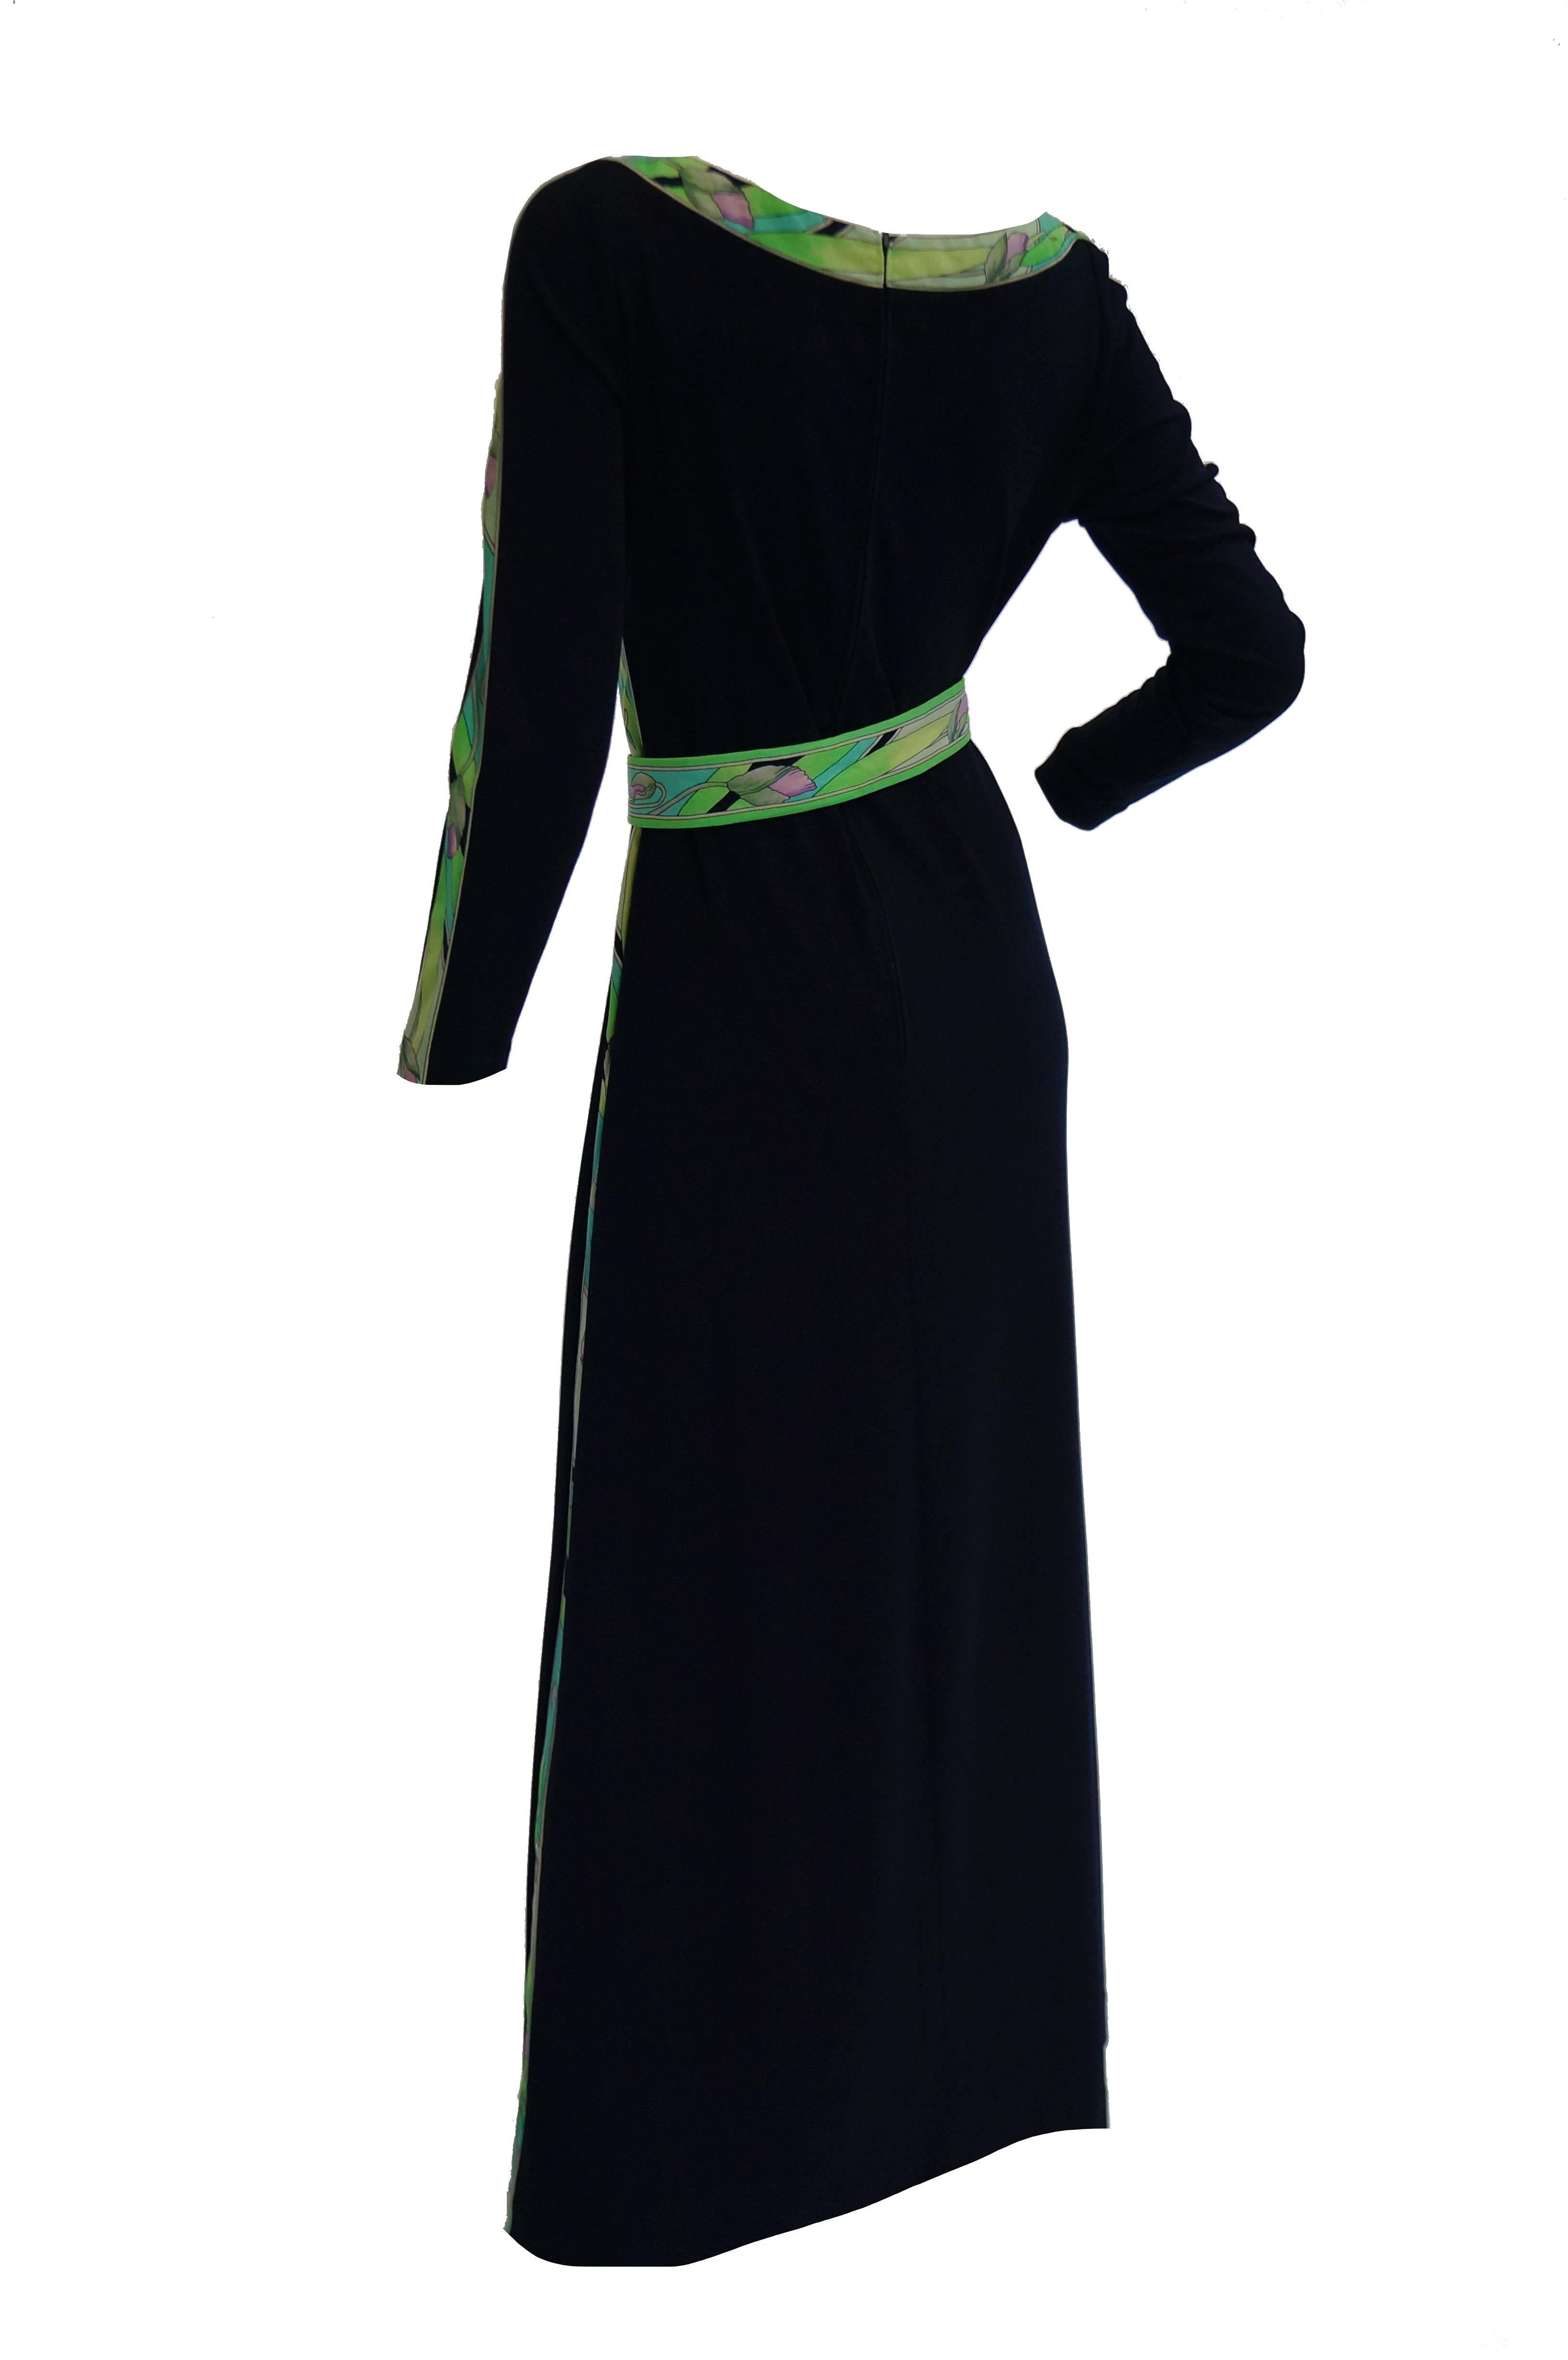 1960s Leonard Black Knit Maxi Dress with Green Floral Contrast 6